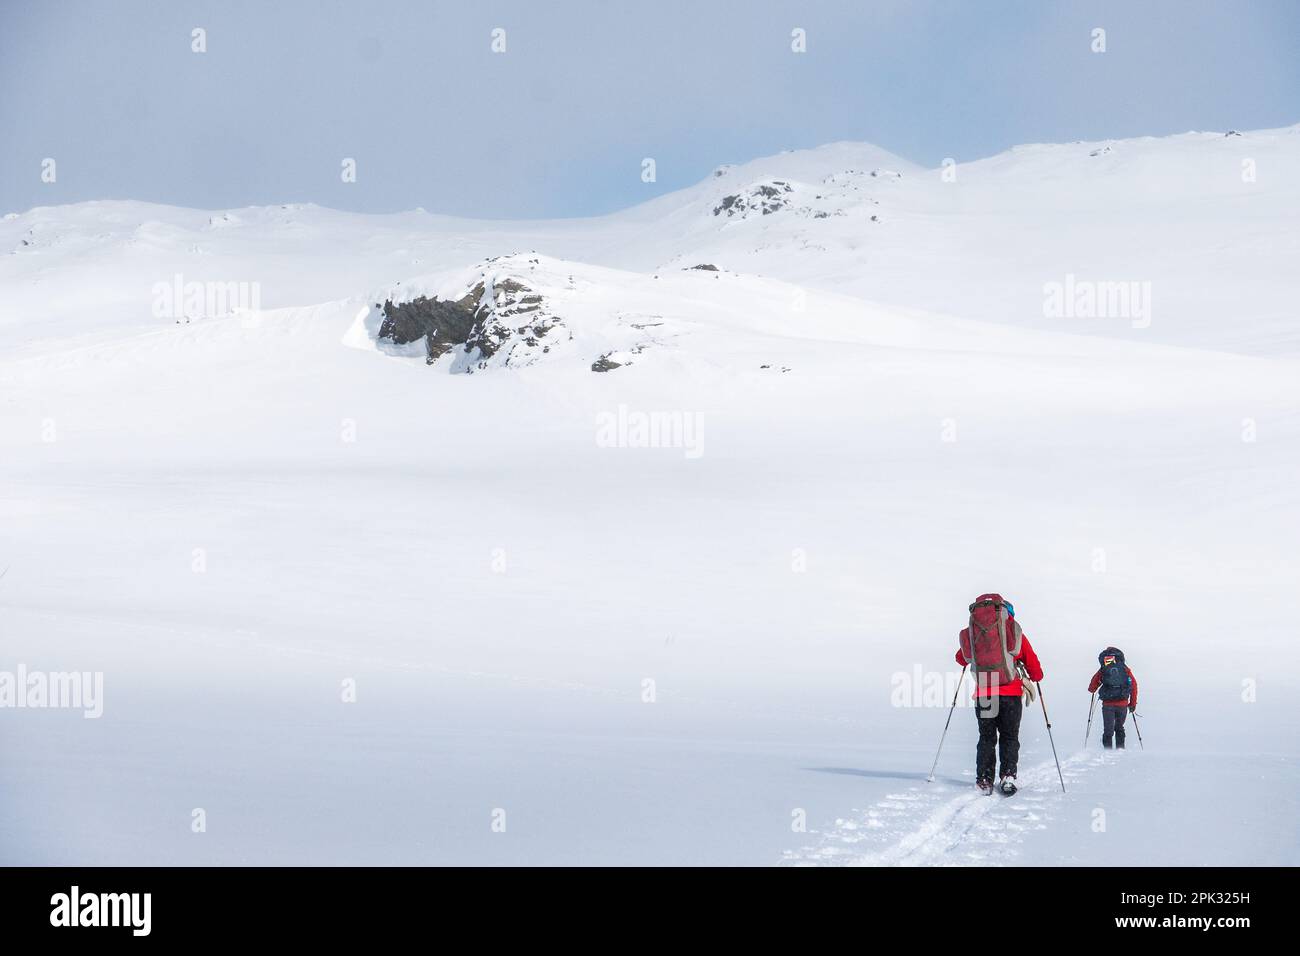 Two nordic skiers in a snowy landscape in Norway Stock Photo